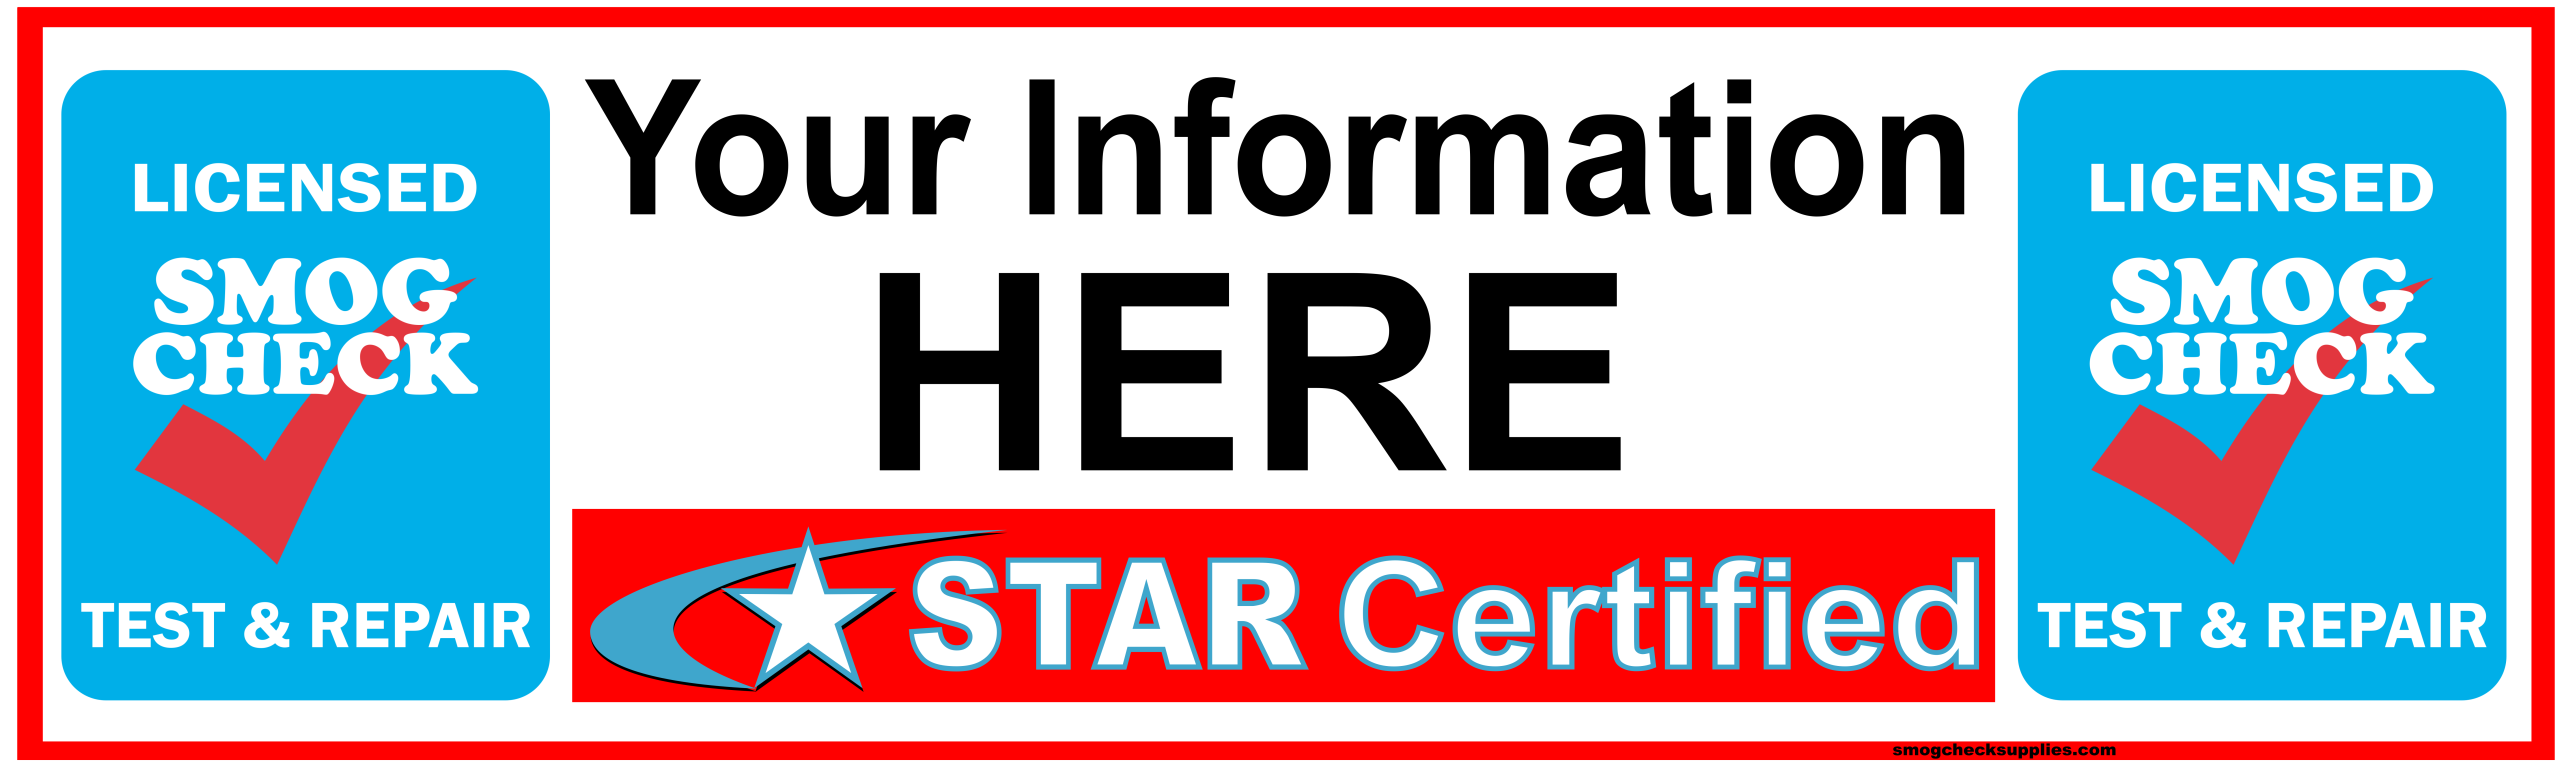 STAR CERTIFIED TEST & REPAIR SMOG CHECK BANNER